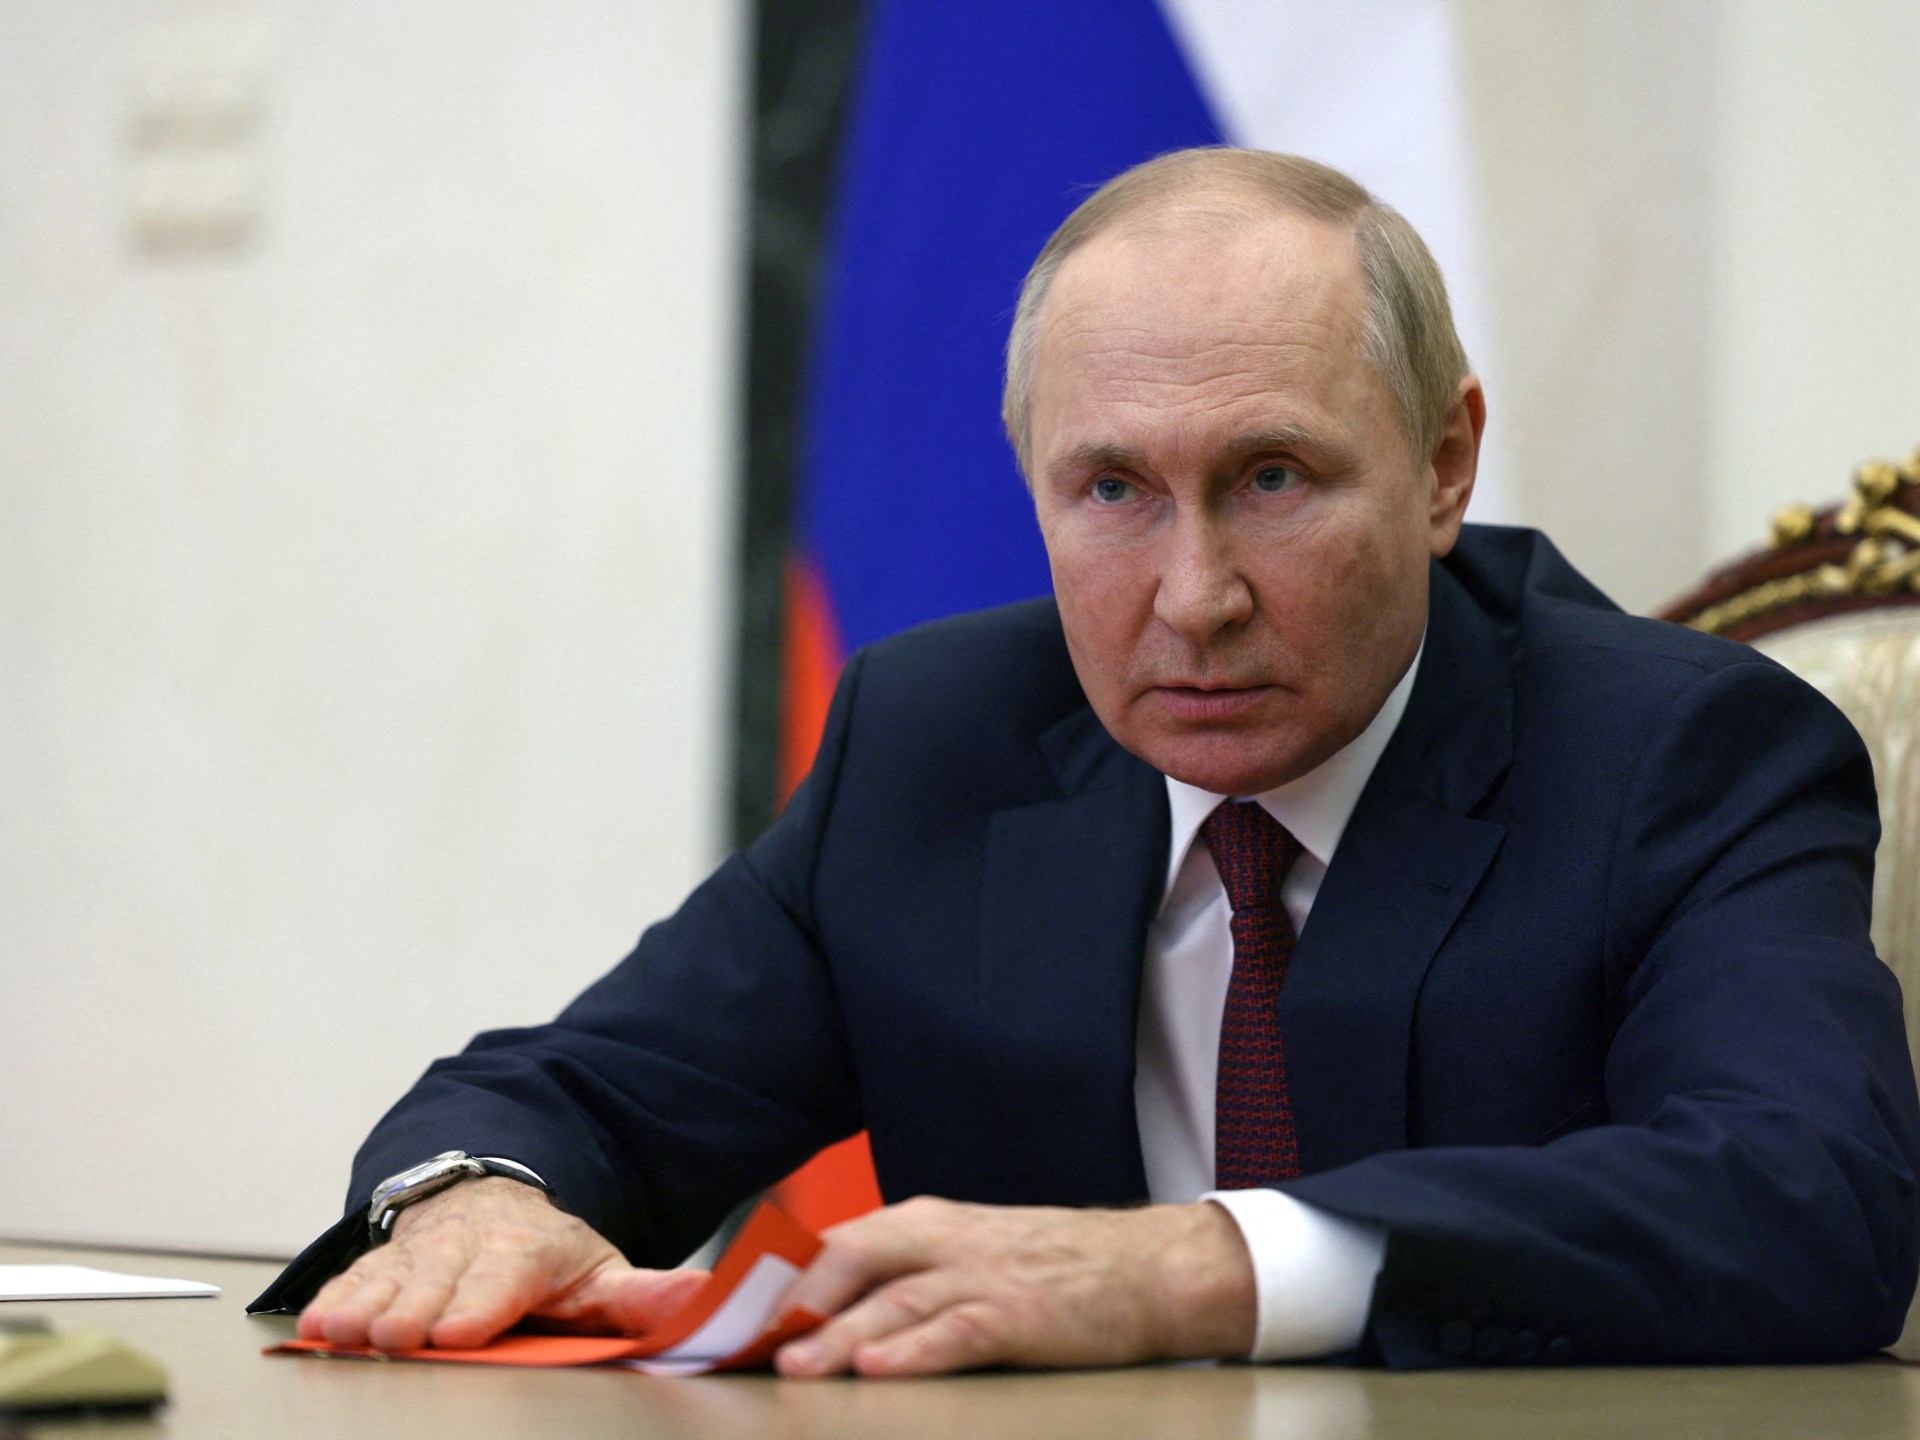 Putin signs ‘independence’ decrees for Zaporizhia and Kherson